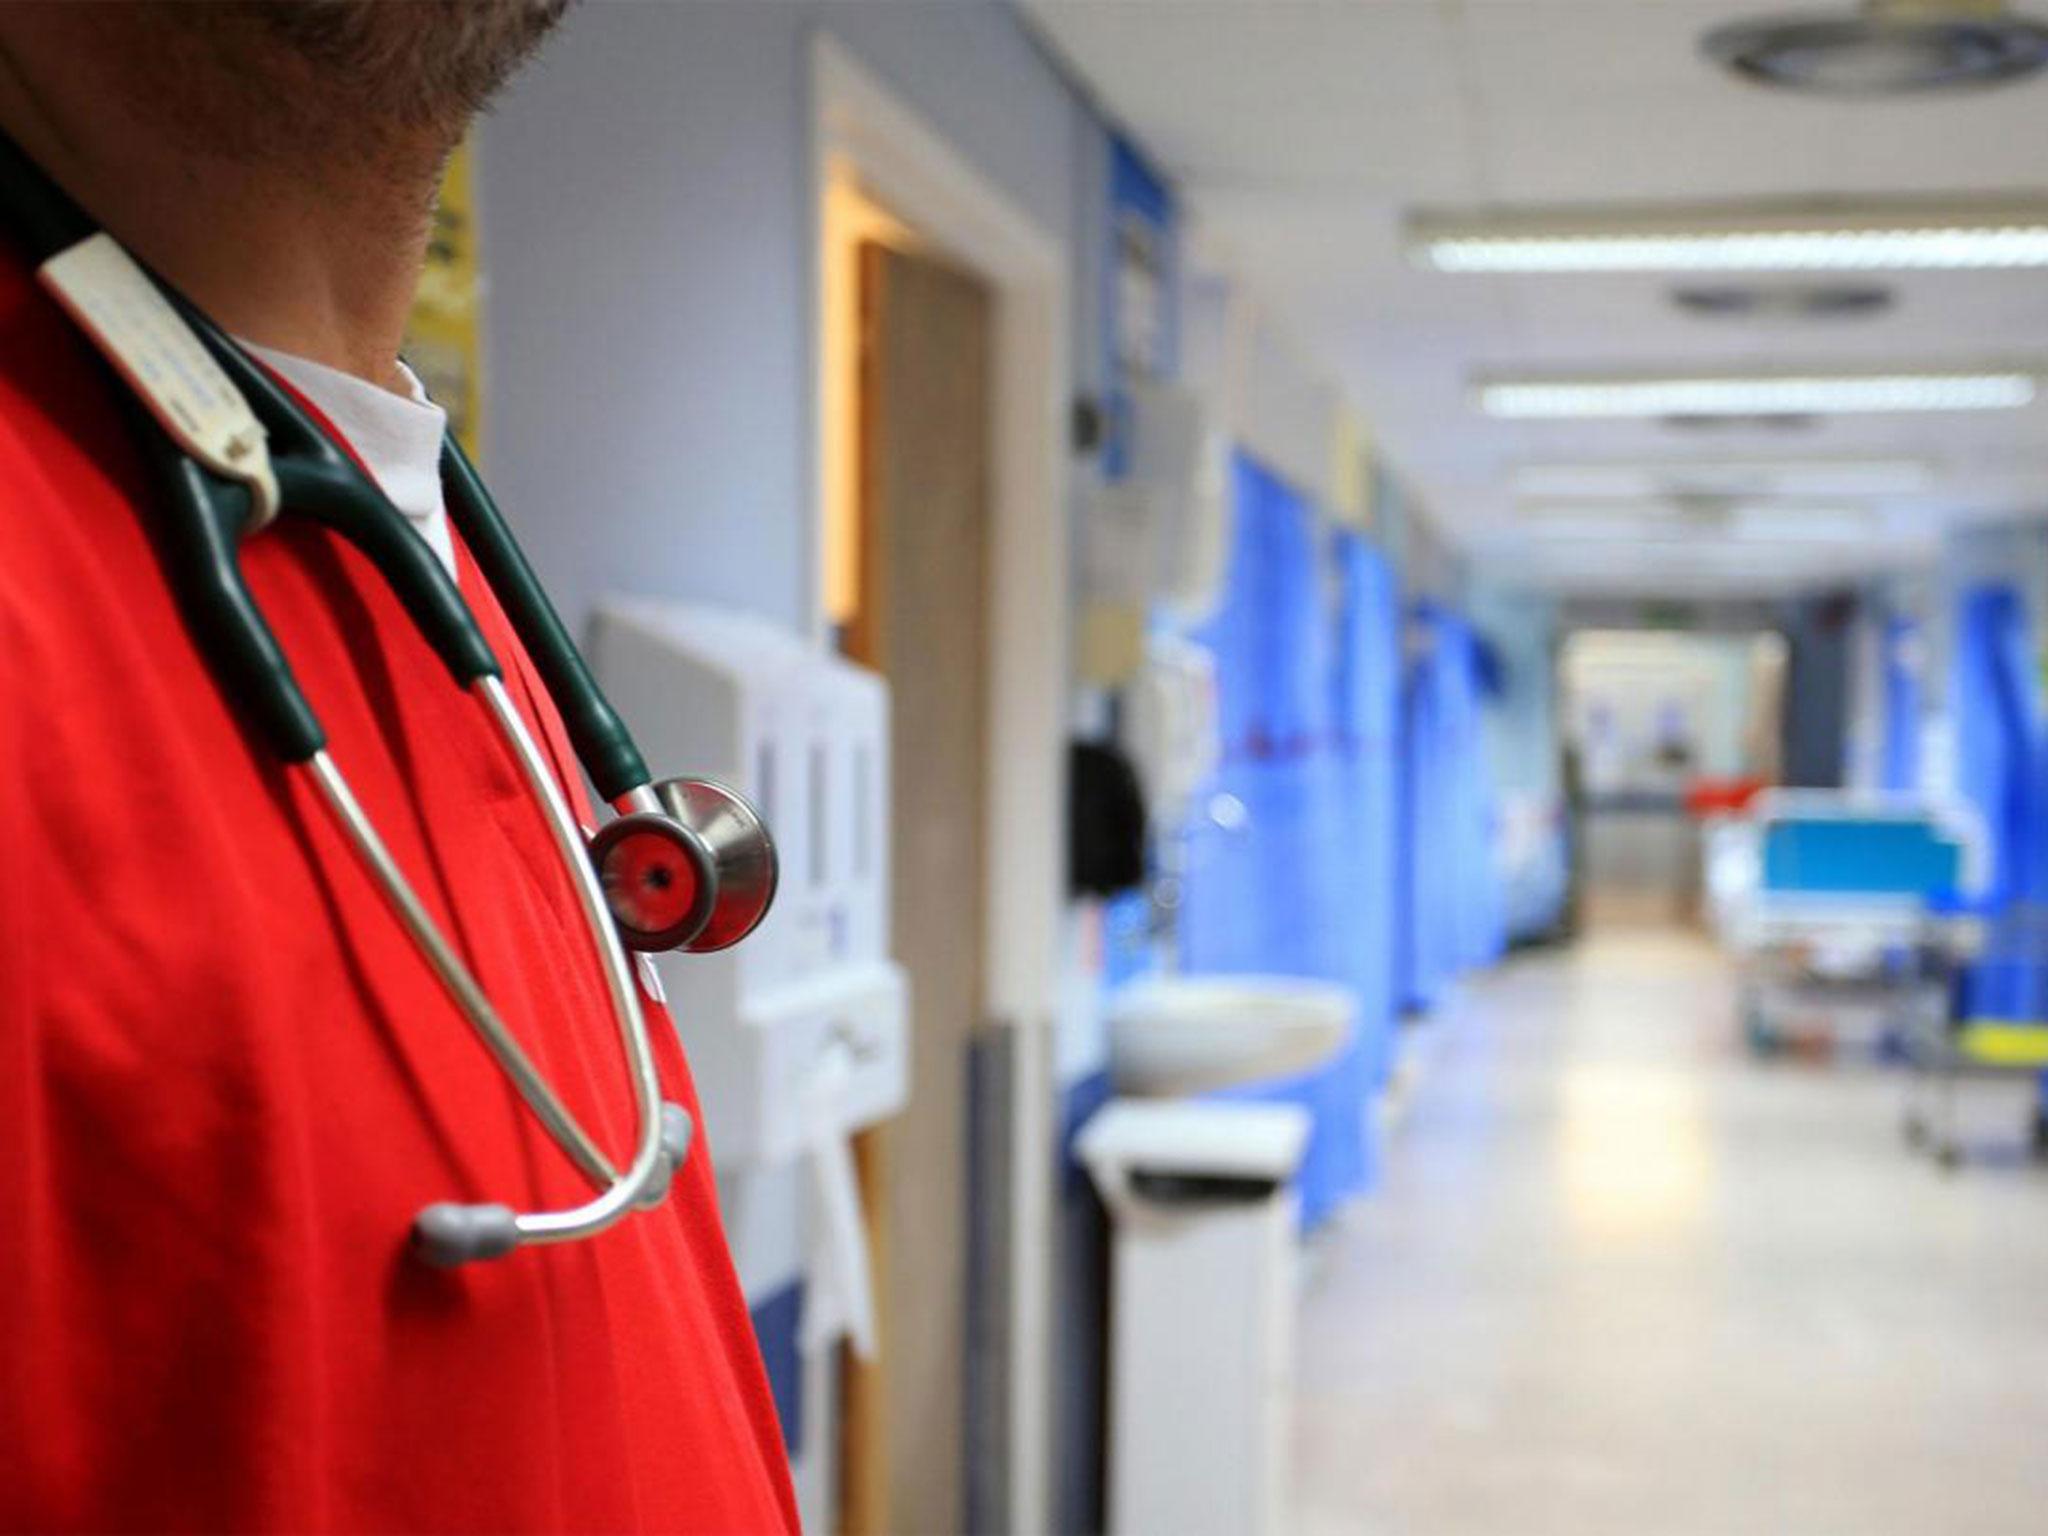 The initiative aims to improve patient care and tackle the chronic understaffing suffered by the NHS